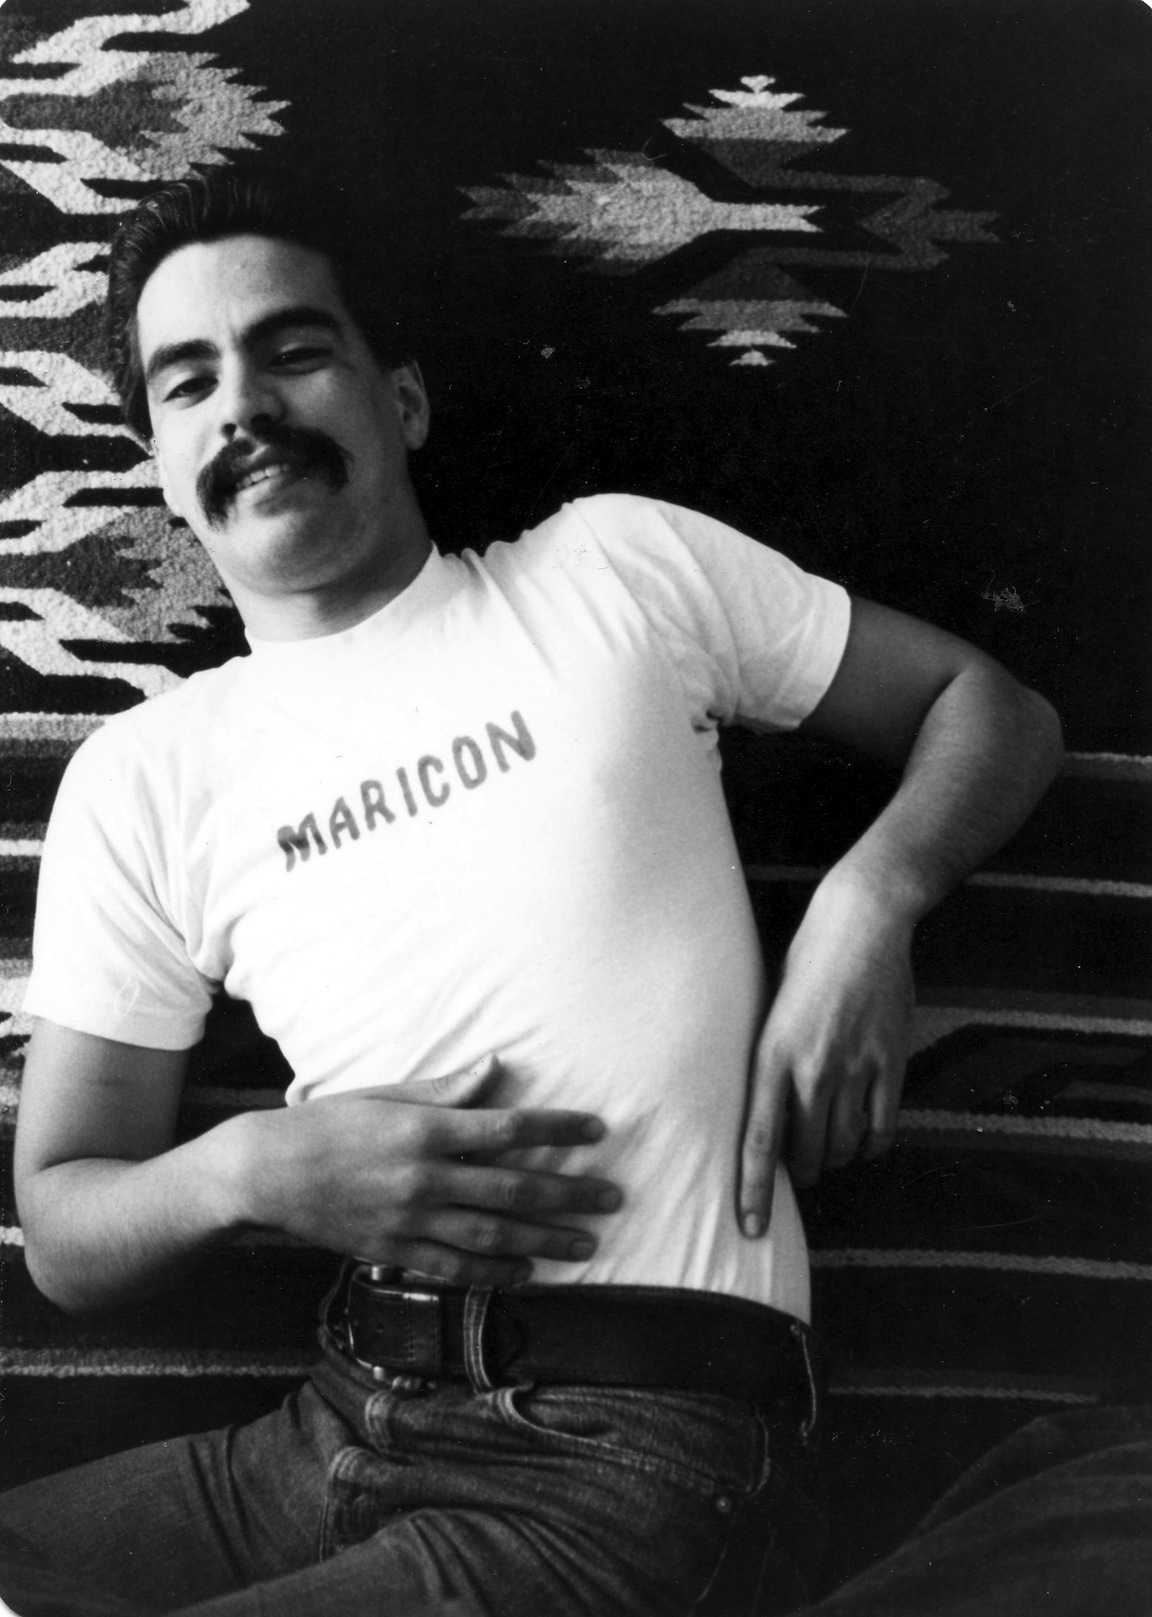 Joey Terrill as part of the Maricon Series, 1977. Photo credit: Teddy Sandoval.